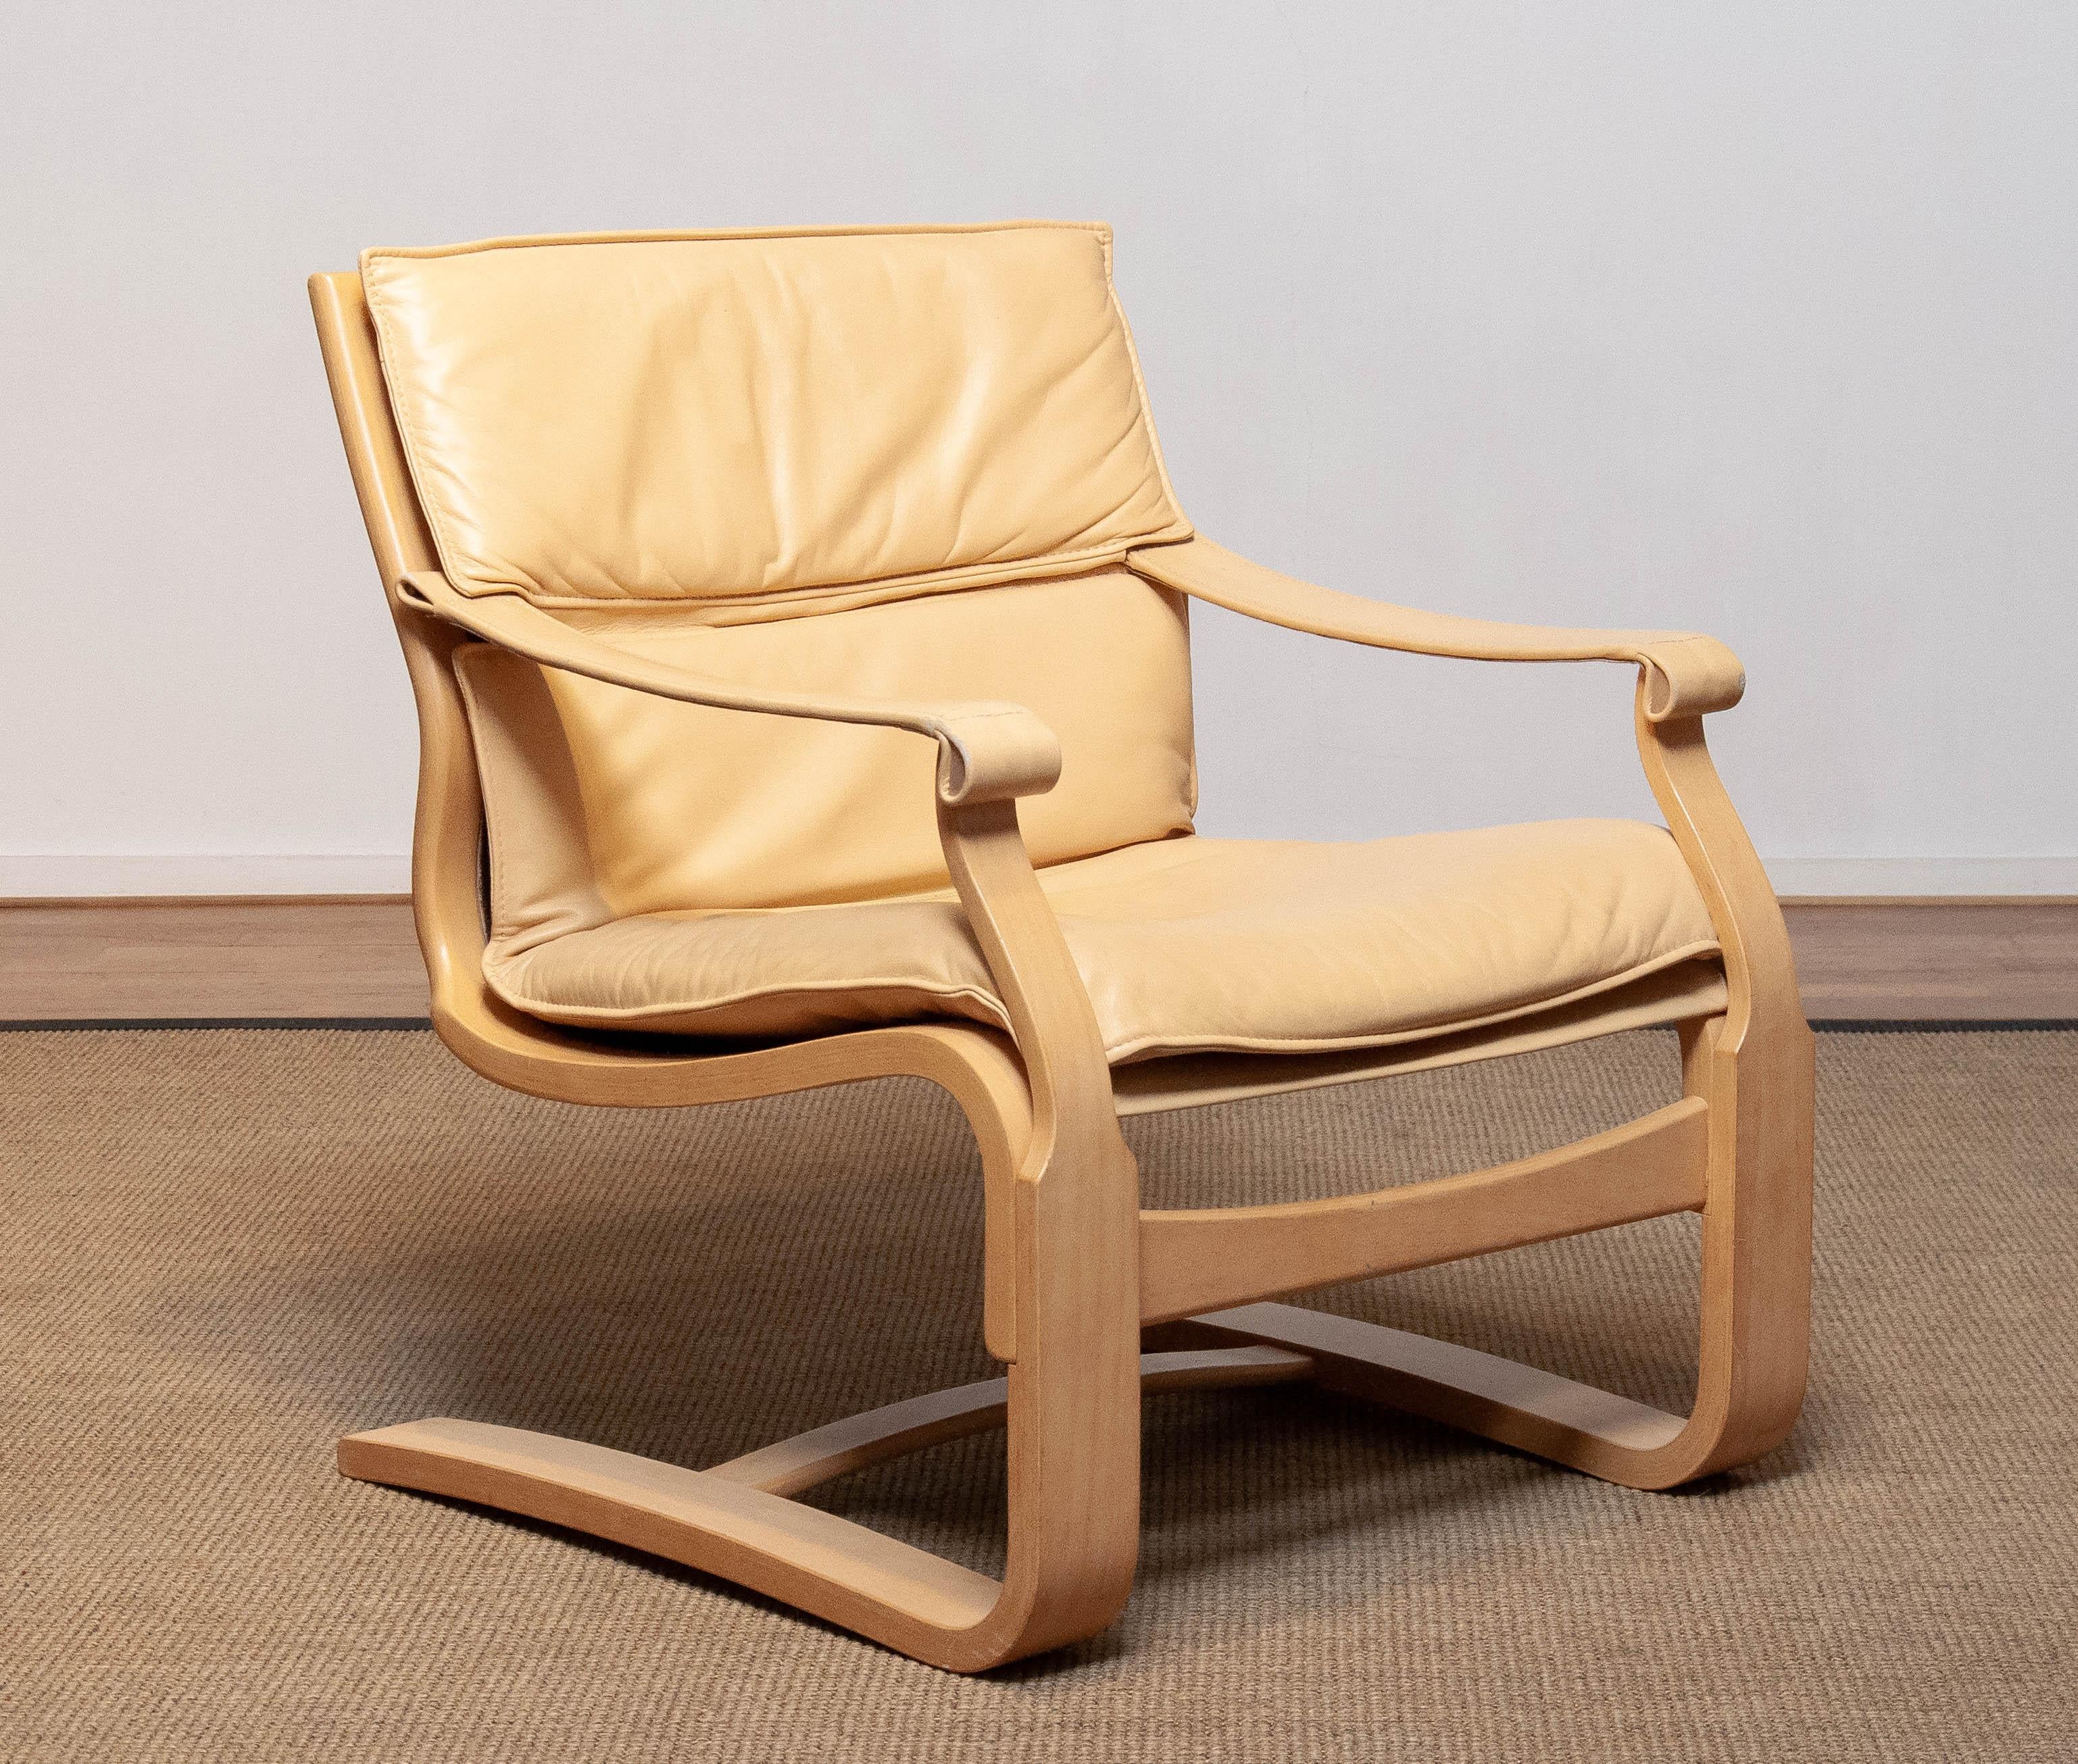 Scandinavian Modern beech bentwood lounge chair designed by Ake Fribytter and manufactured by Nelo in the 1970's upholstered with beige / creme leather and in allover good and very comfortable condition.
Please note that we have two chairs in our